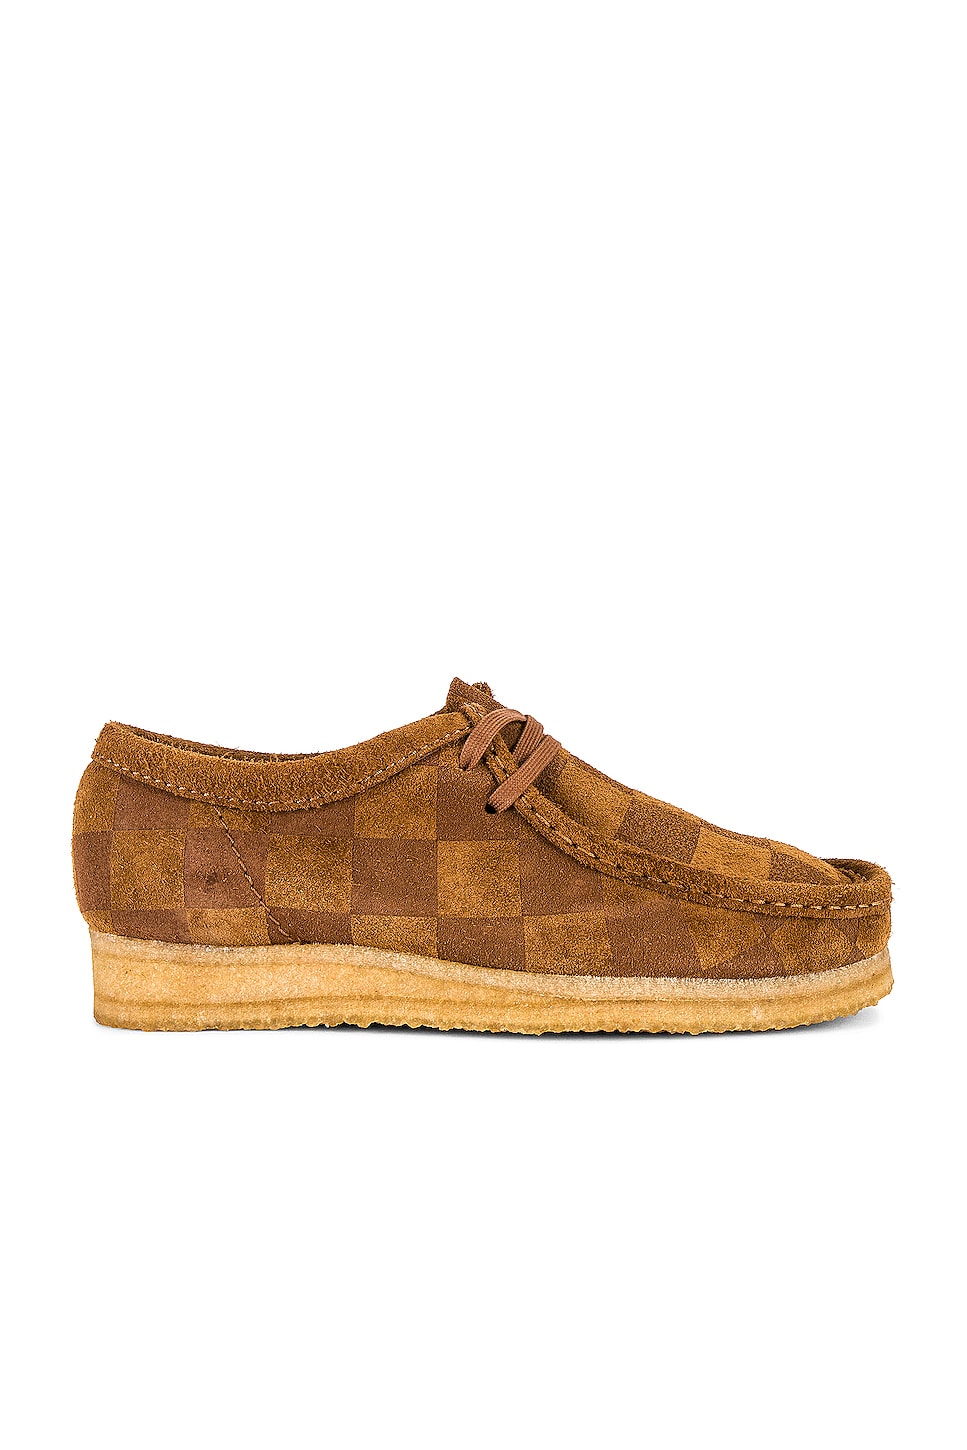 Image 1 of Clarks Wallabee Check Shoe in Cola